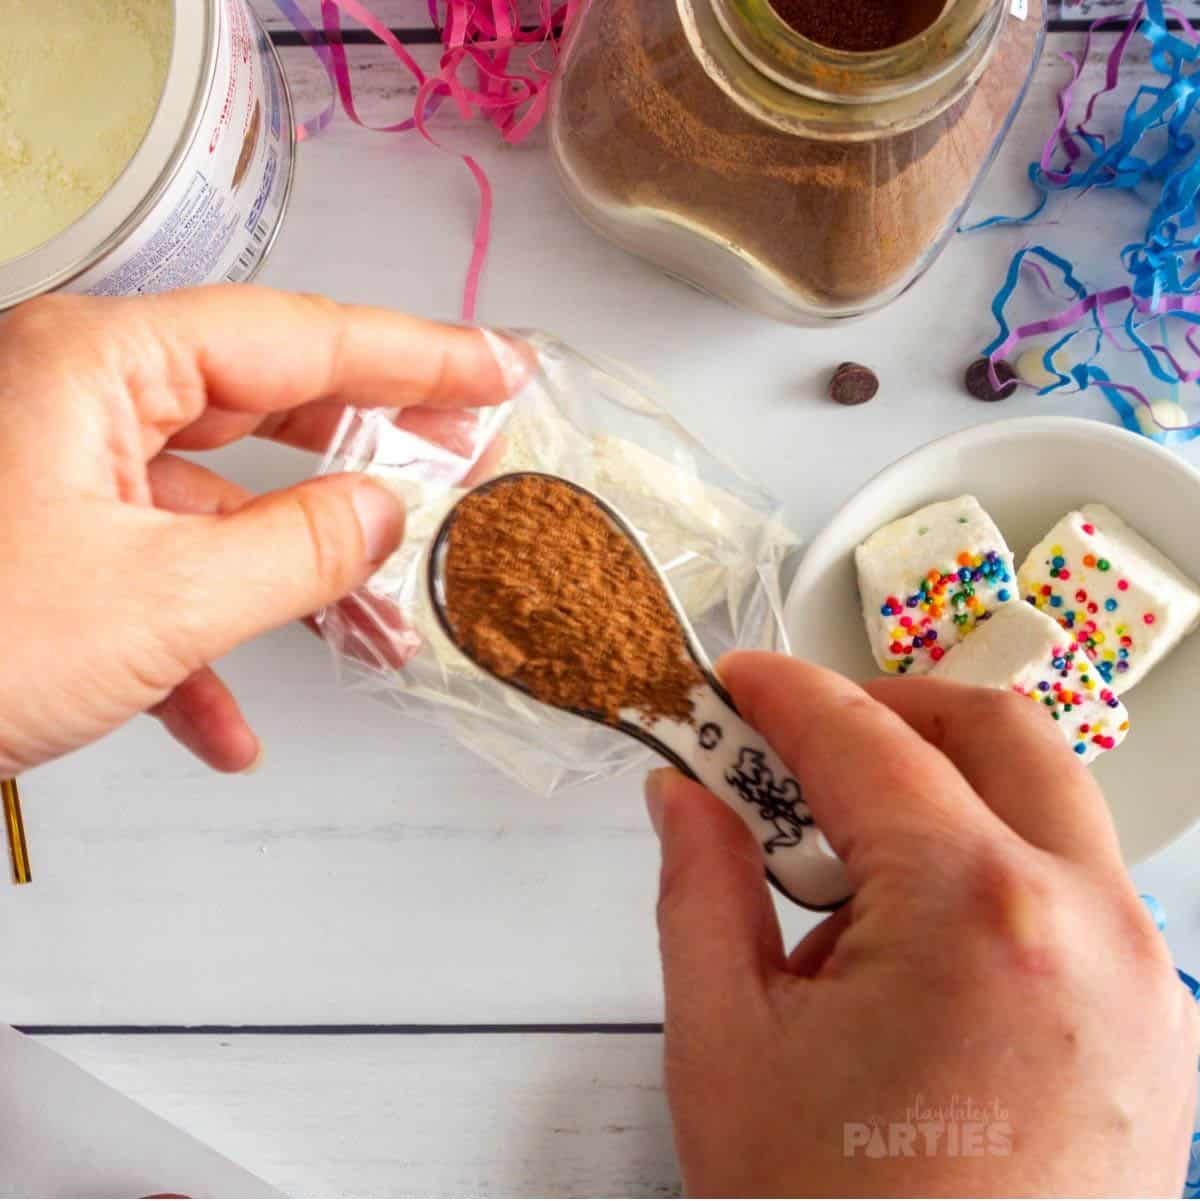 A woman's hand pouring hot cocoa mix into a favor bag.